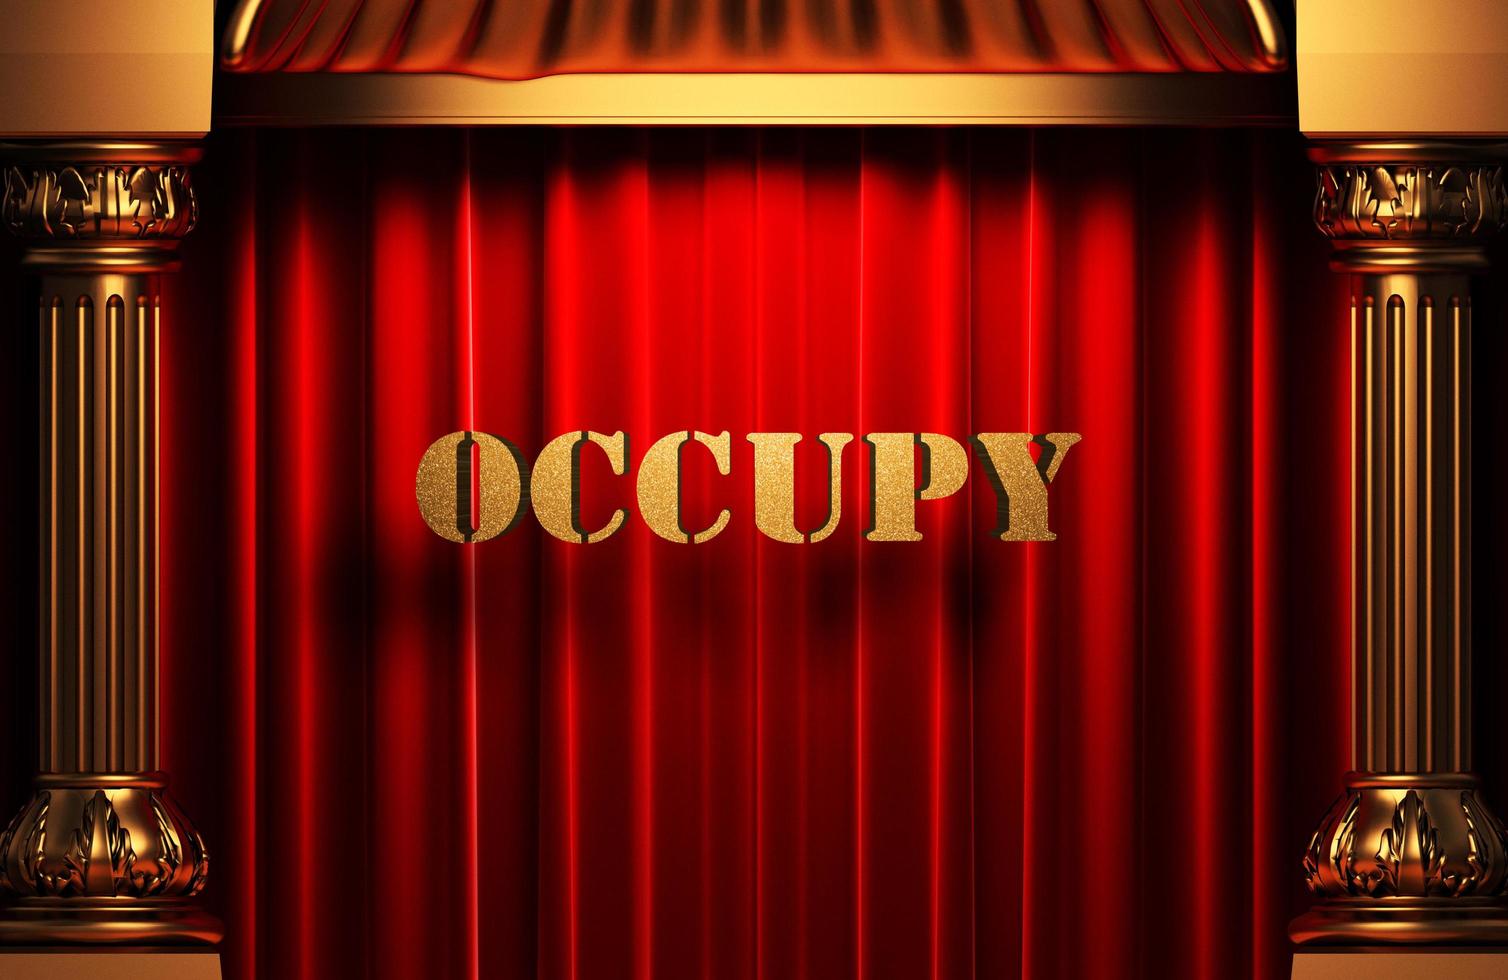 occupy golden word on red curtain photo